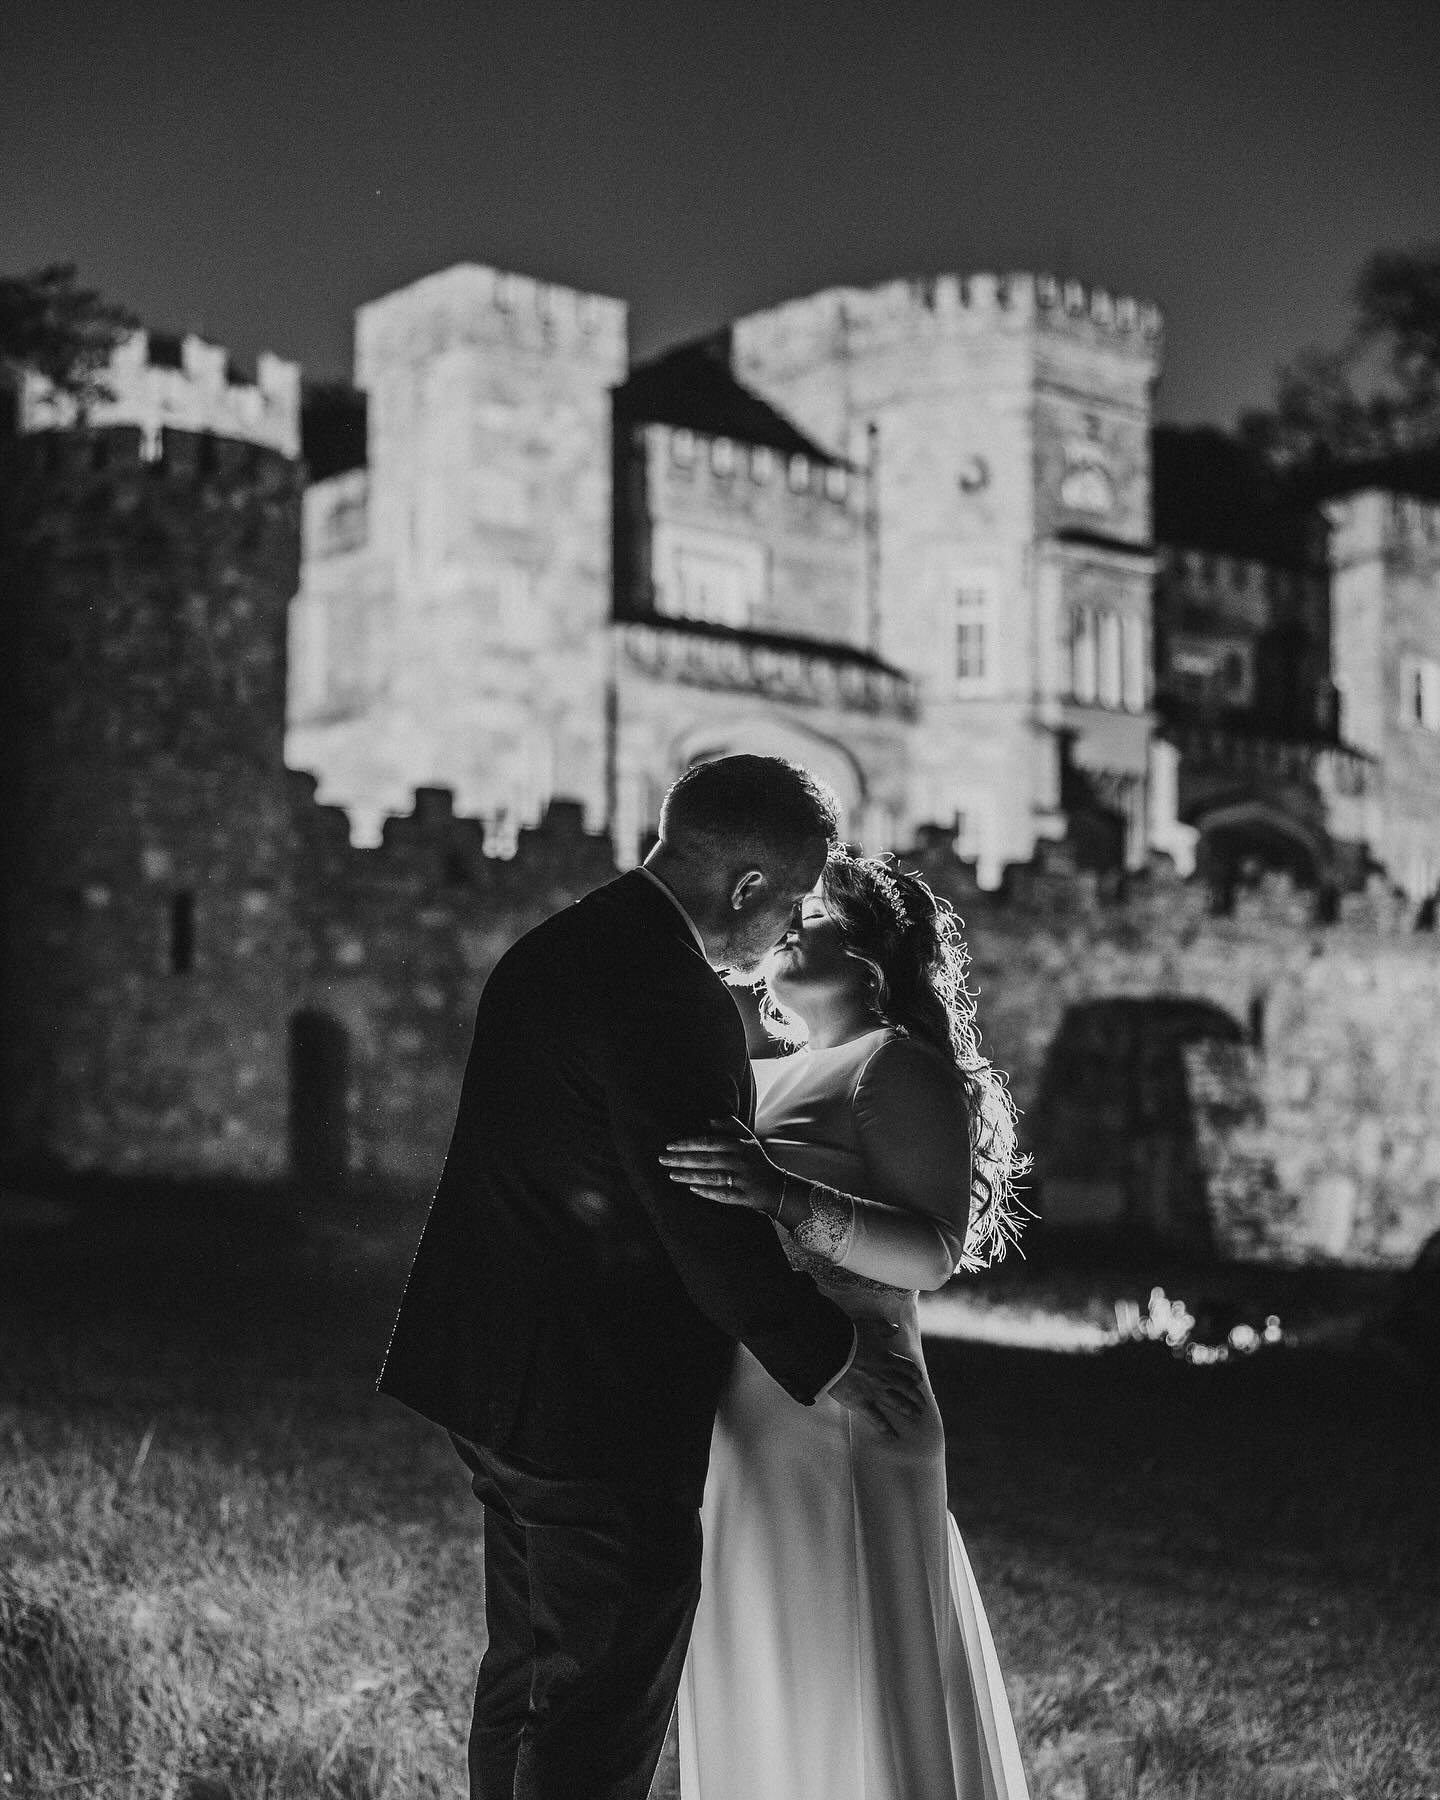 What a super chilled, fun, relaxed, &amp; glorious weather wedding we had yesterday at the awesome @killeavycastle. Rebecca &amp; Connor you were klass, just a pure delight from start to finish! ❤️ much love Andrew &amp; Matt. See yous very soon to d